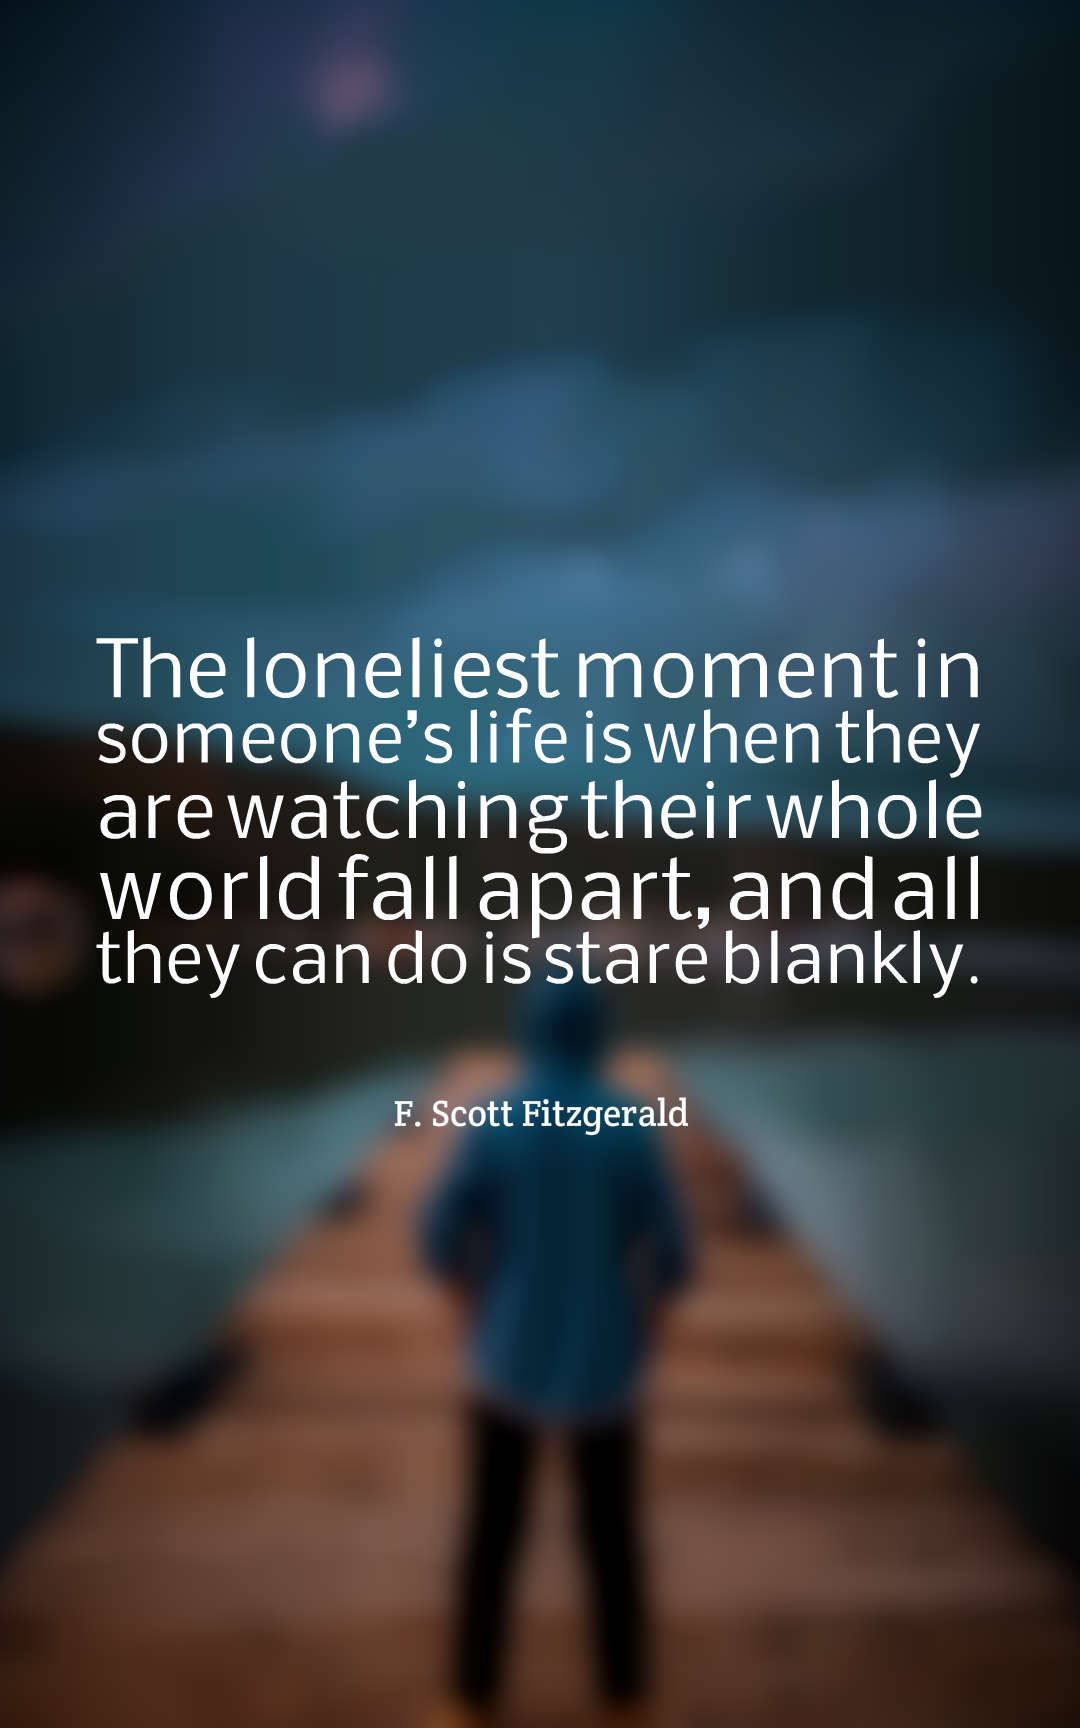 The loneliest moment in someones life is when they are watching their whole world fall apart